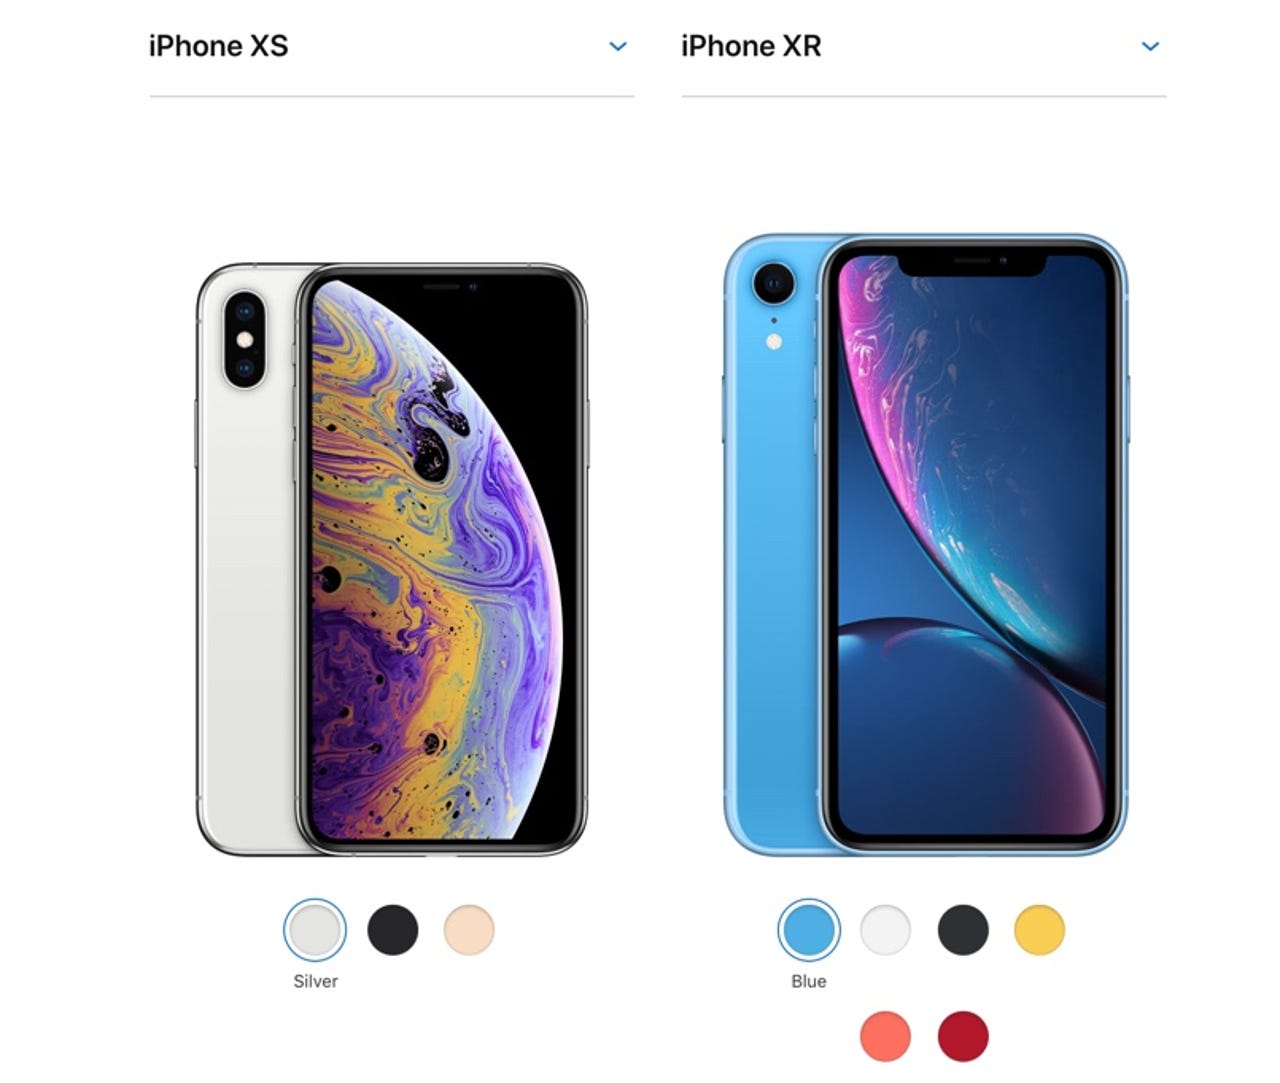 #1: In many ways, the iPhone XR is like the iPhone XS